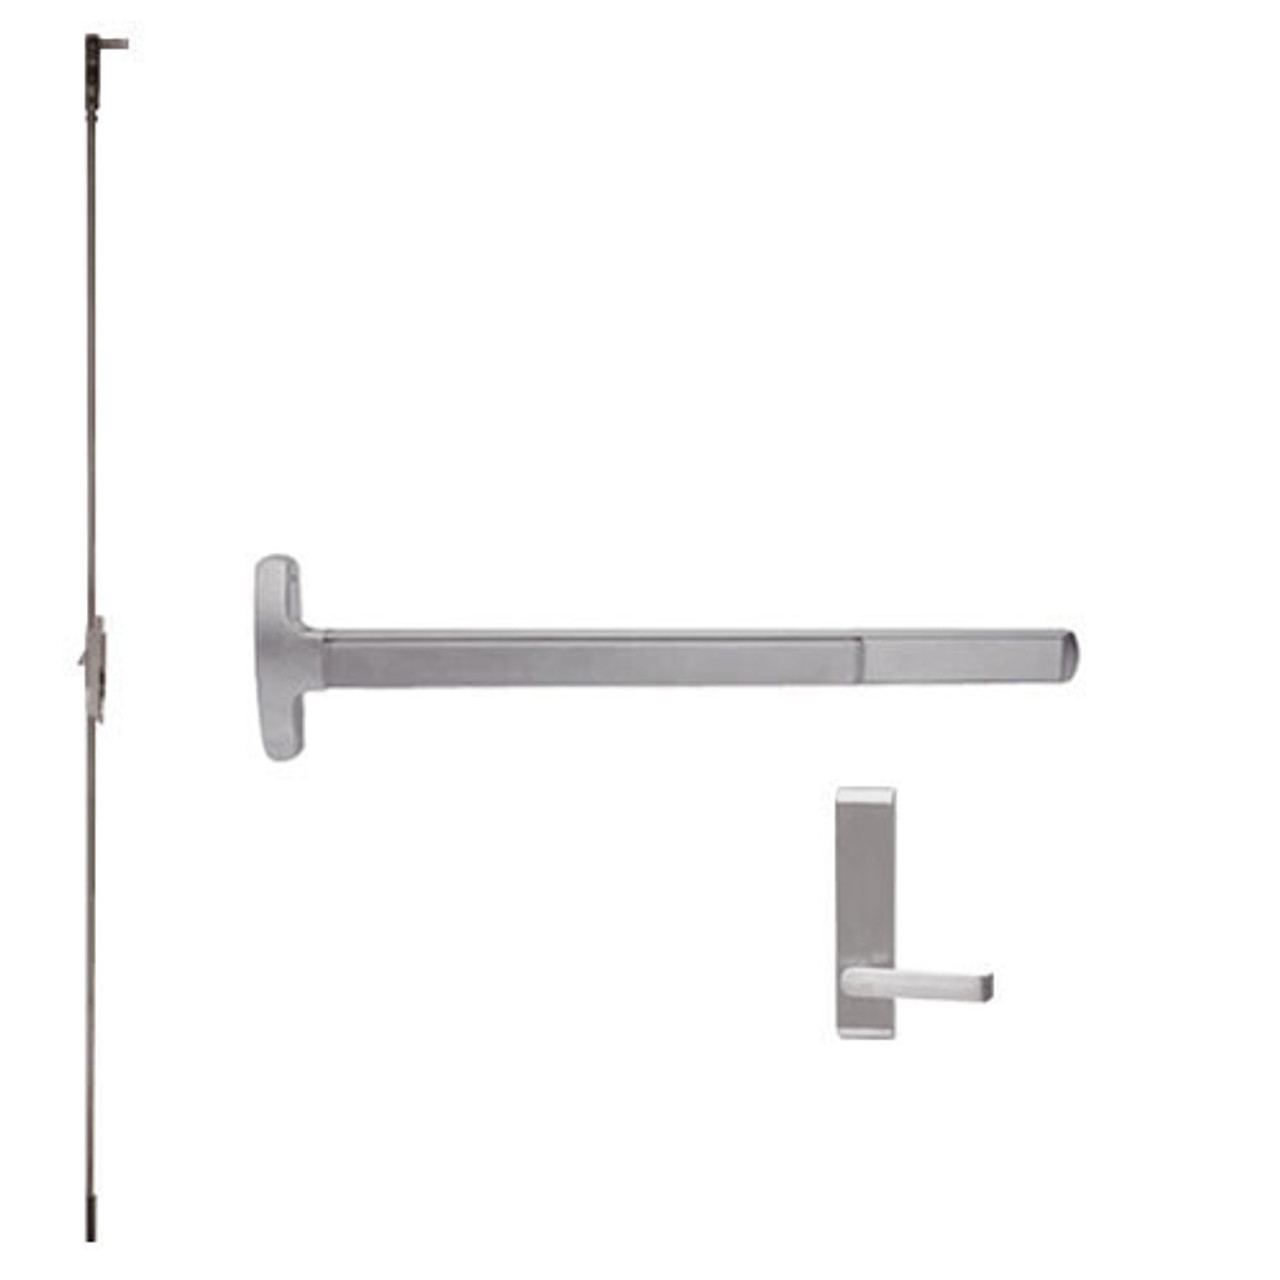 F-24-C-L-DT-DANE-US32D-3-RHR Falcon Exit Device in Satin Stainless Steel